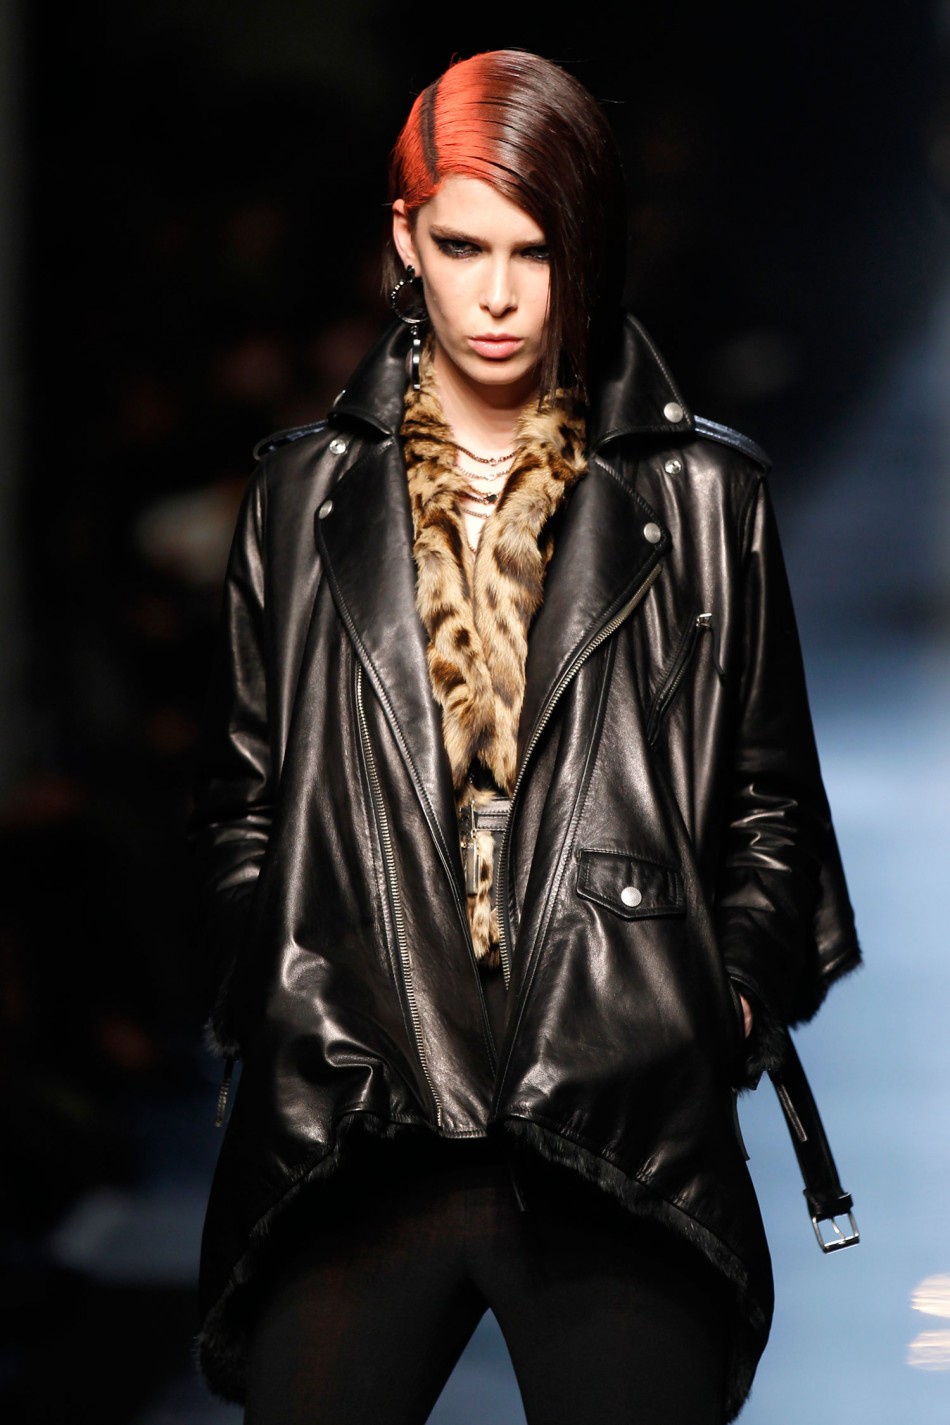 Androgynous Model Andrej Pejic Walks the Ramp for Jean Paul Gaultiers FallWinter Collection